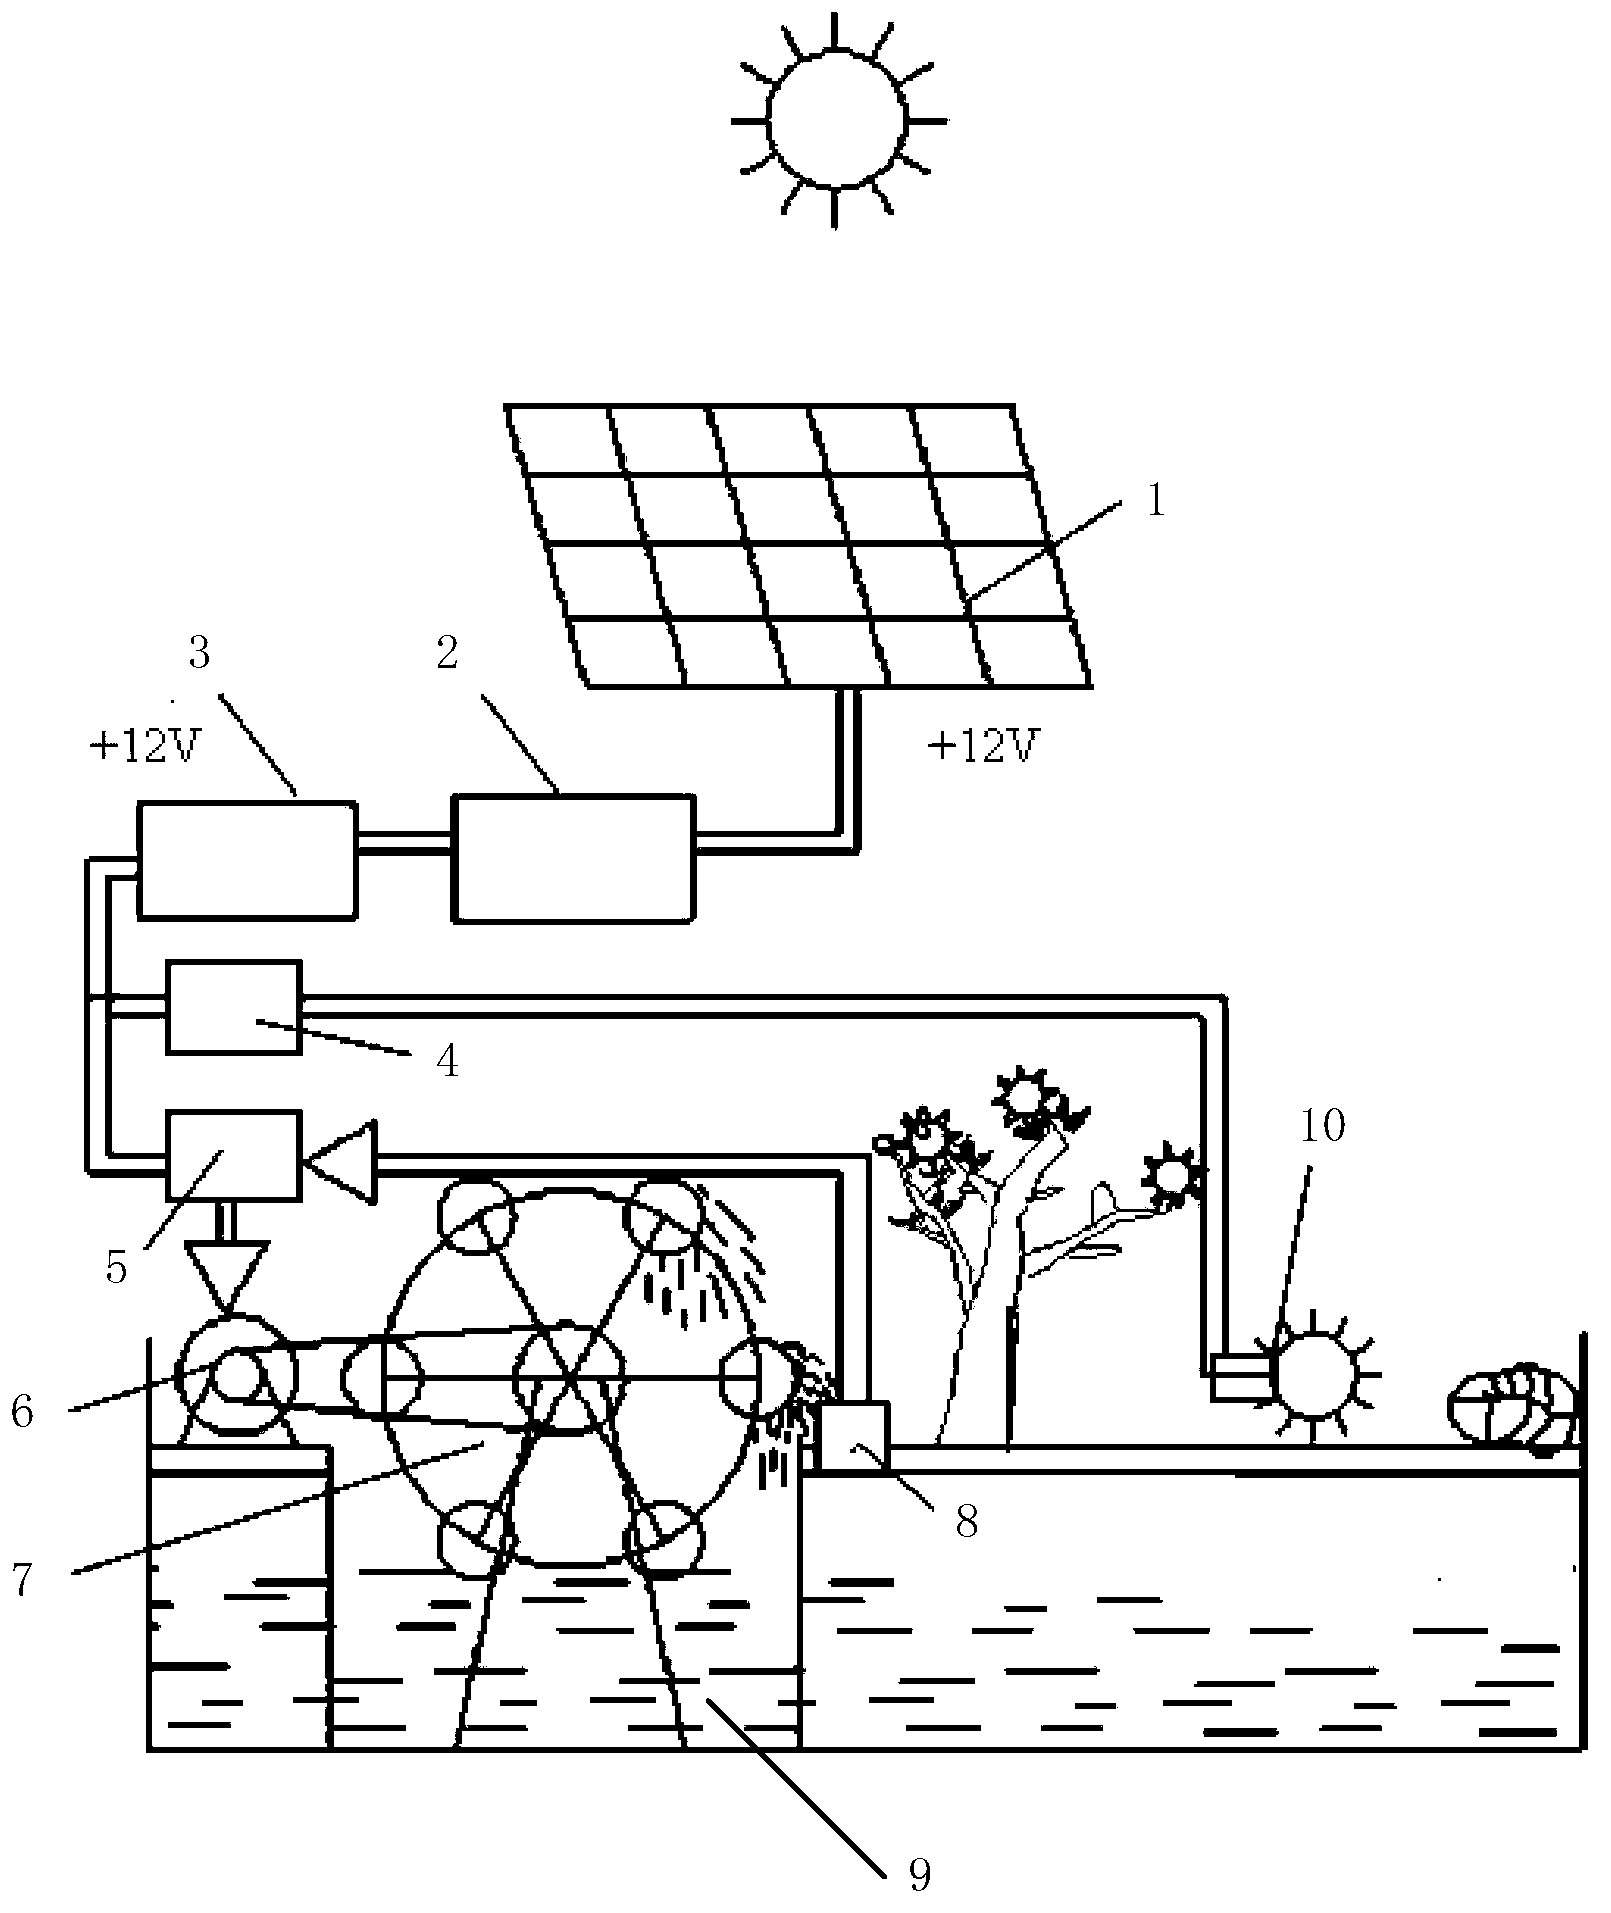 Environment-friendly solar sound-light control and automatic irrigation system